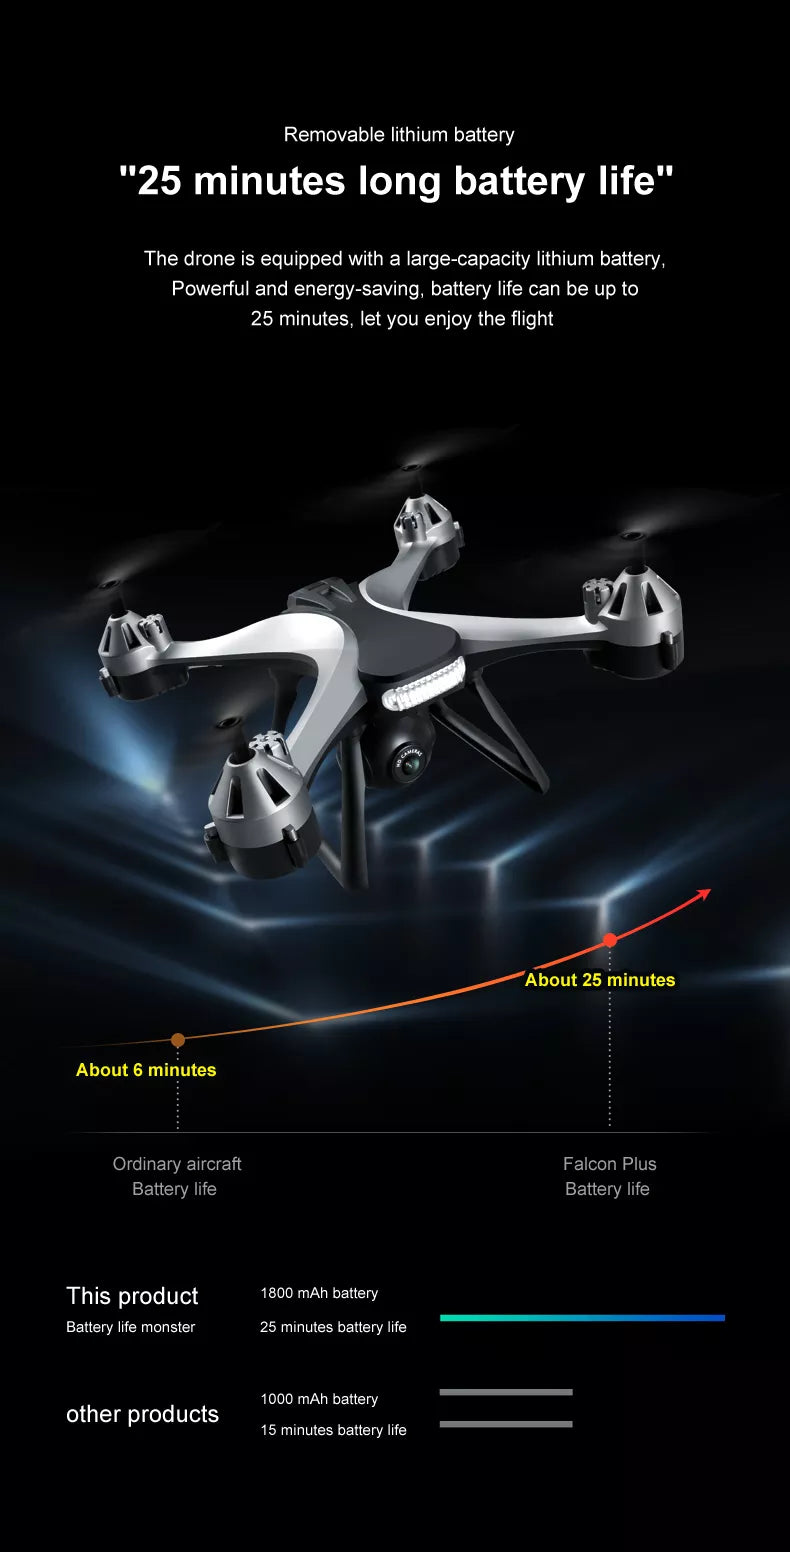 JCRC JC801 Mini Drone, lithium battery "25 minutes long battery life" the drone is equipped with